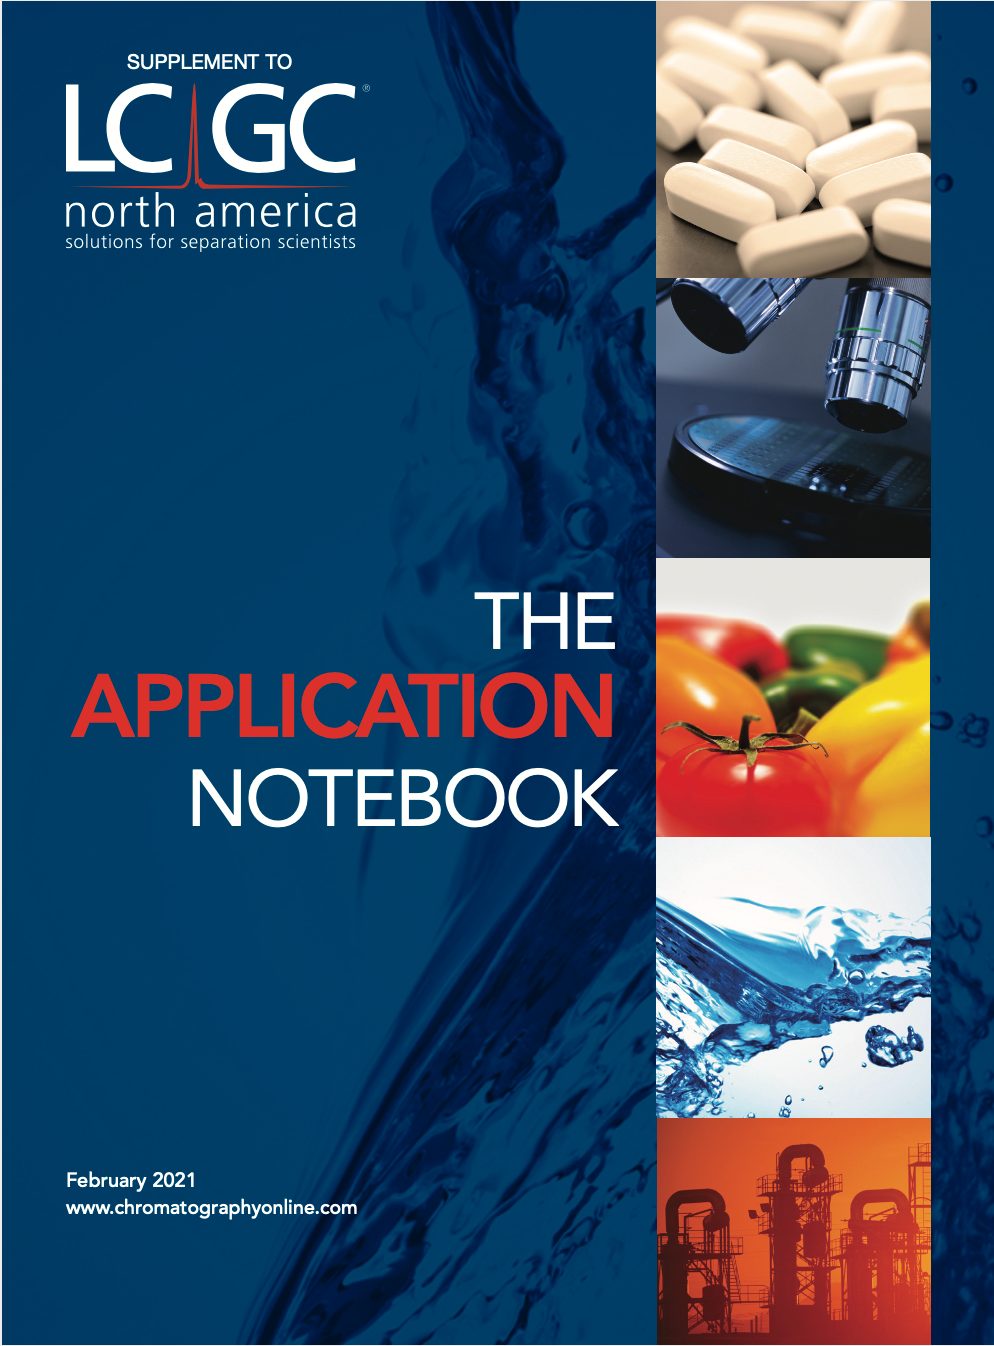 The Application Notebook-02-02-2021